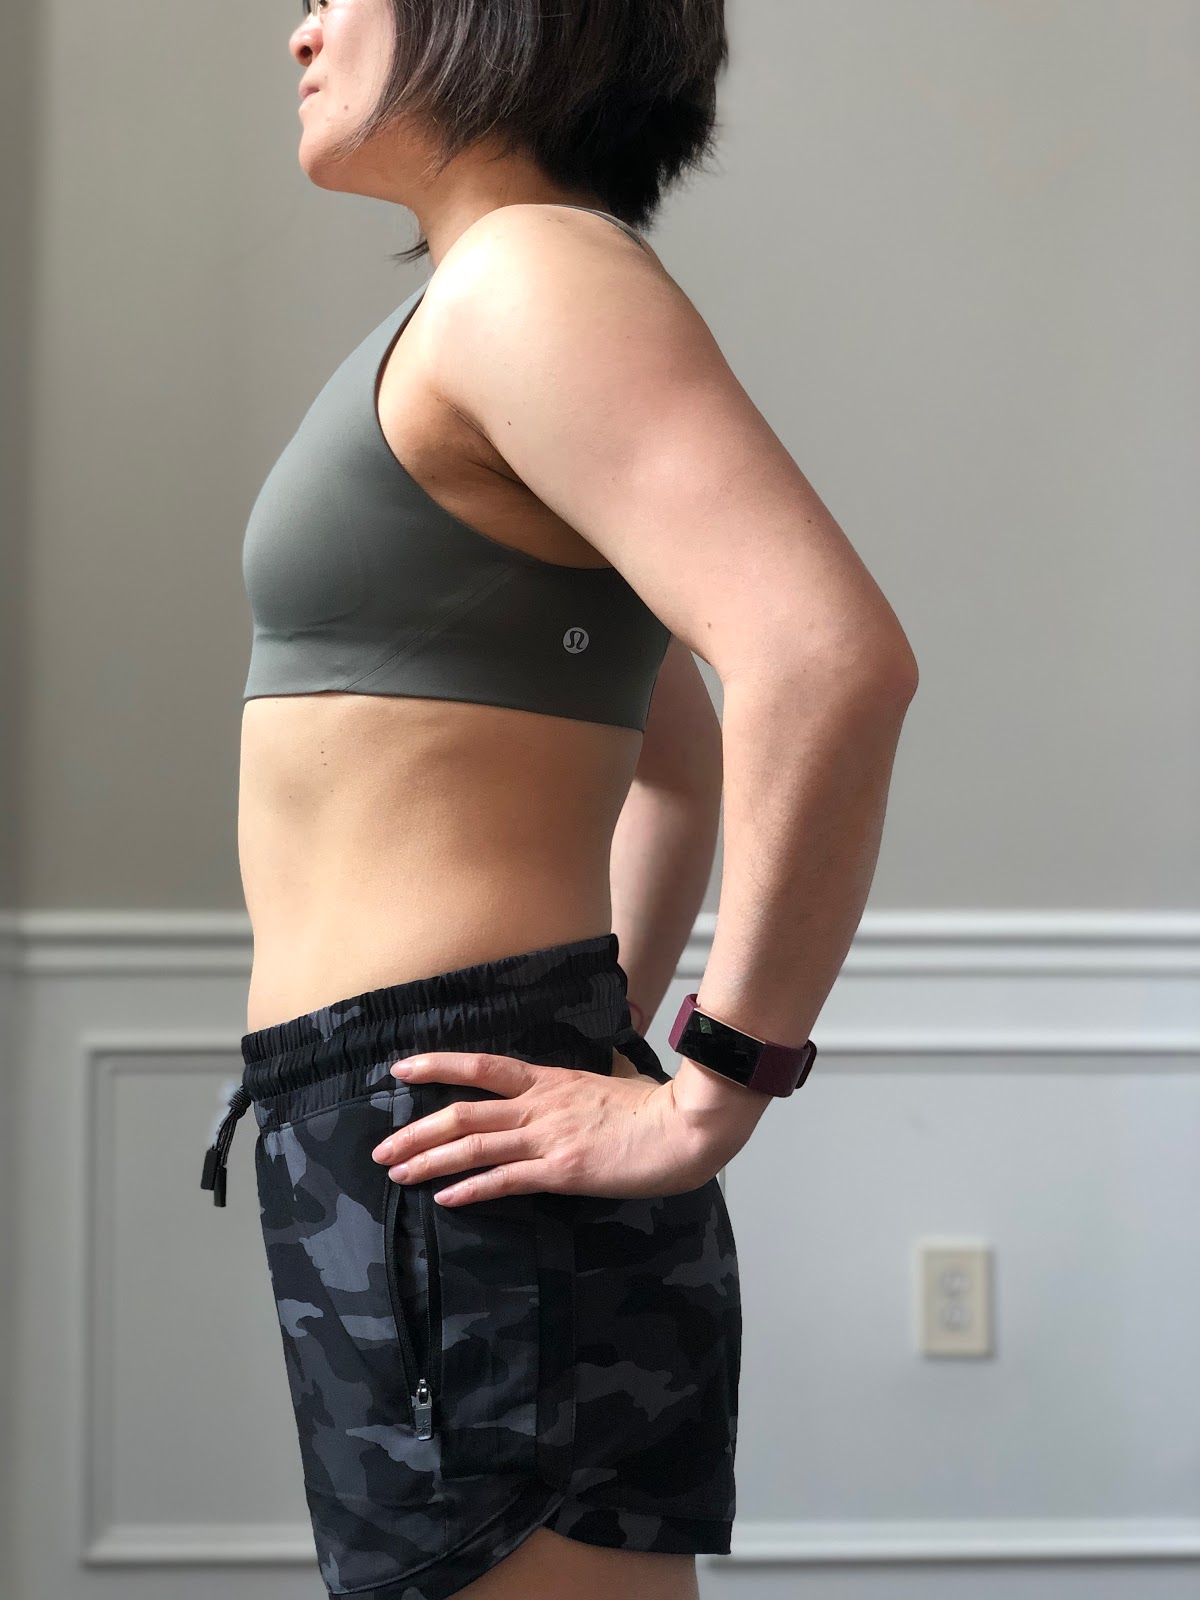 Fit Review! In Alignment Straight Strap Bra & Athleta Girl All Play Short